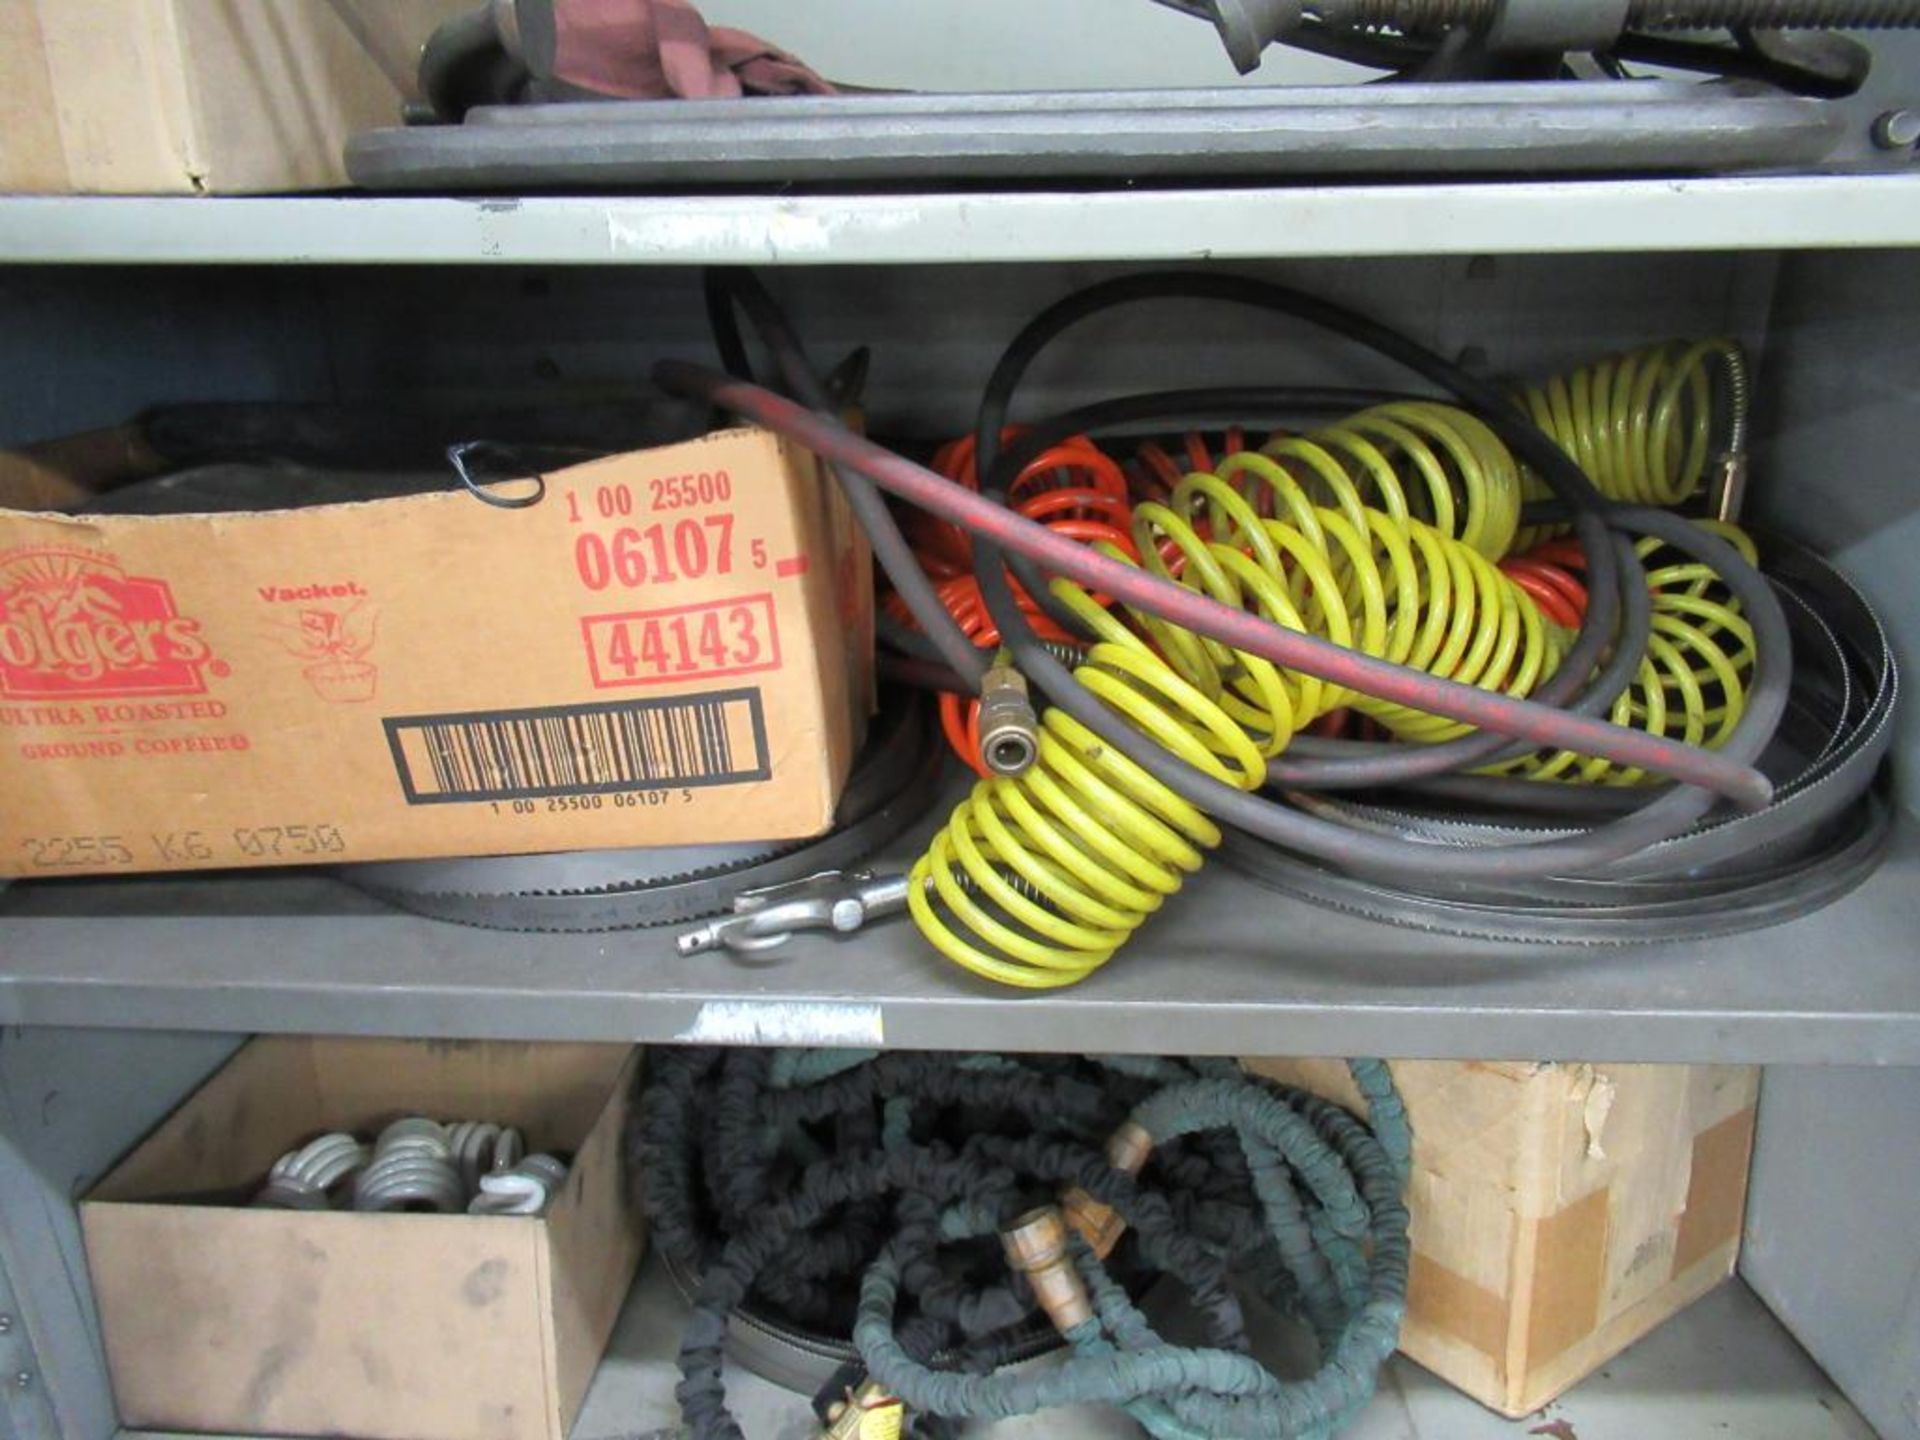 LOT: Cabinet w/Contents of C-Clamps, Spring Clamps, Air Hose, etc. - Image 4 of 8